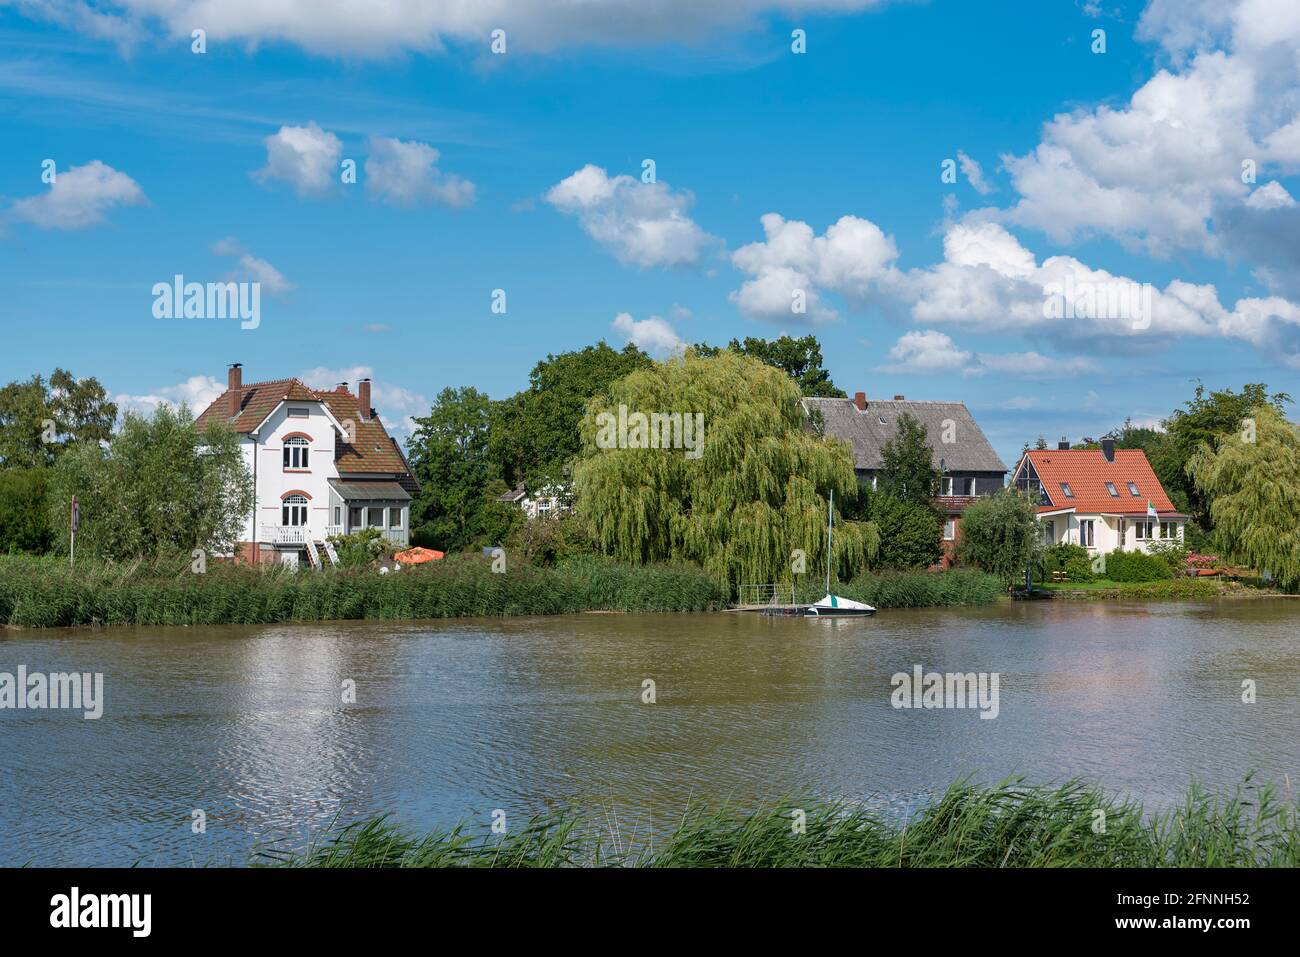 Landscape and houses on the river Oste, Osten, Lower Saxony, Germany, Europe Stock Photo